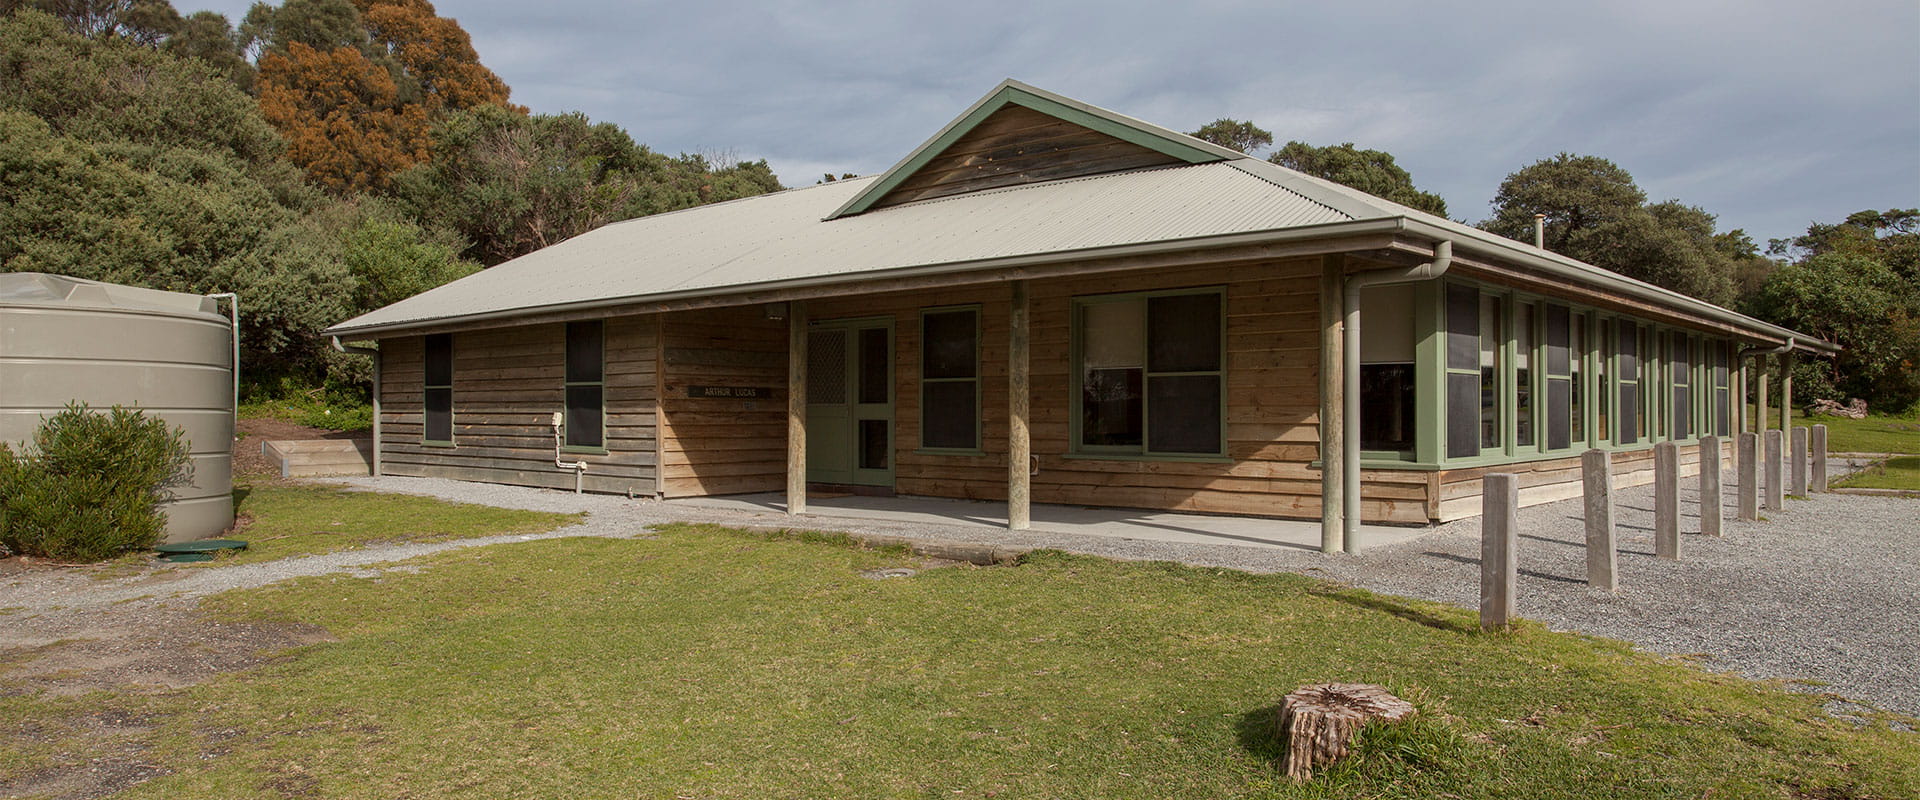 An outside view of a large wooden accommodation structure at Wilsons Promontory National Park.